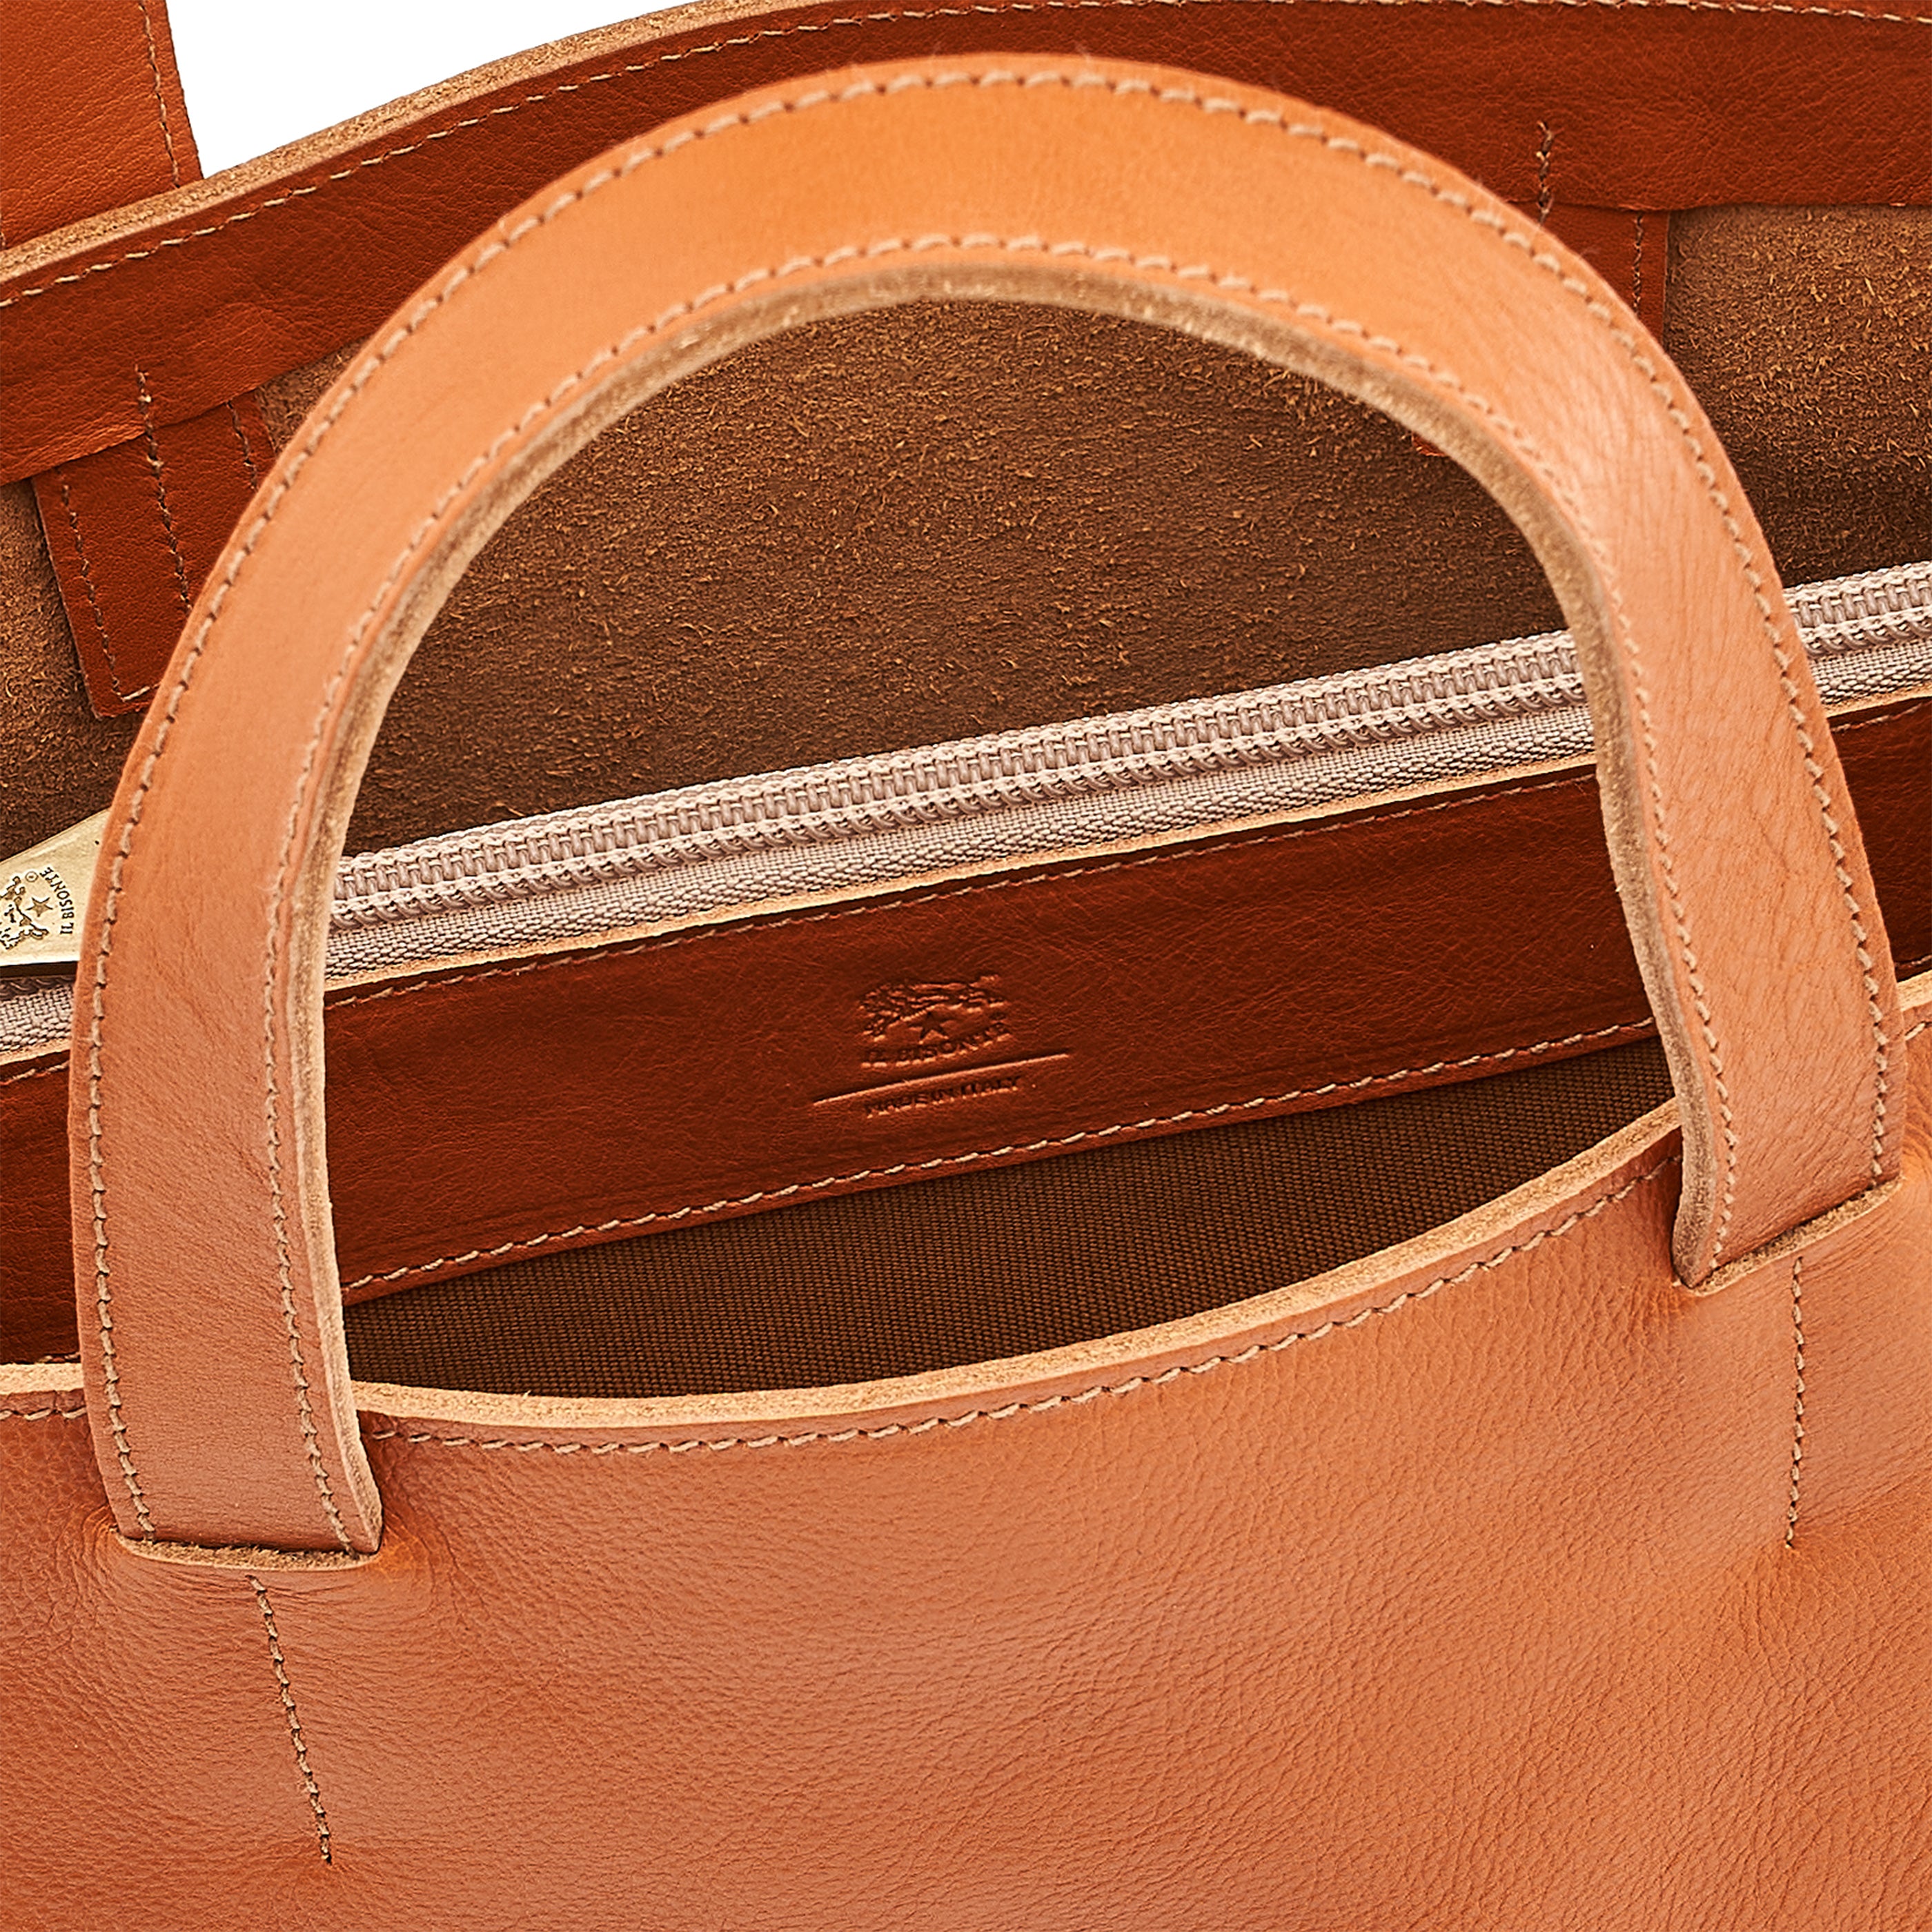 Opale | Women's tote bag in leather color caramel